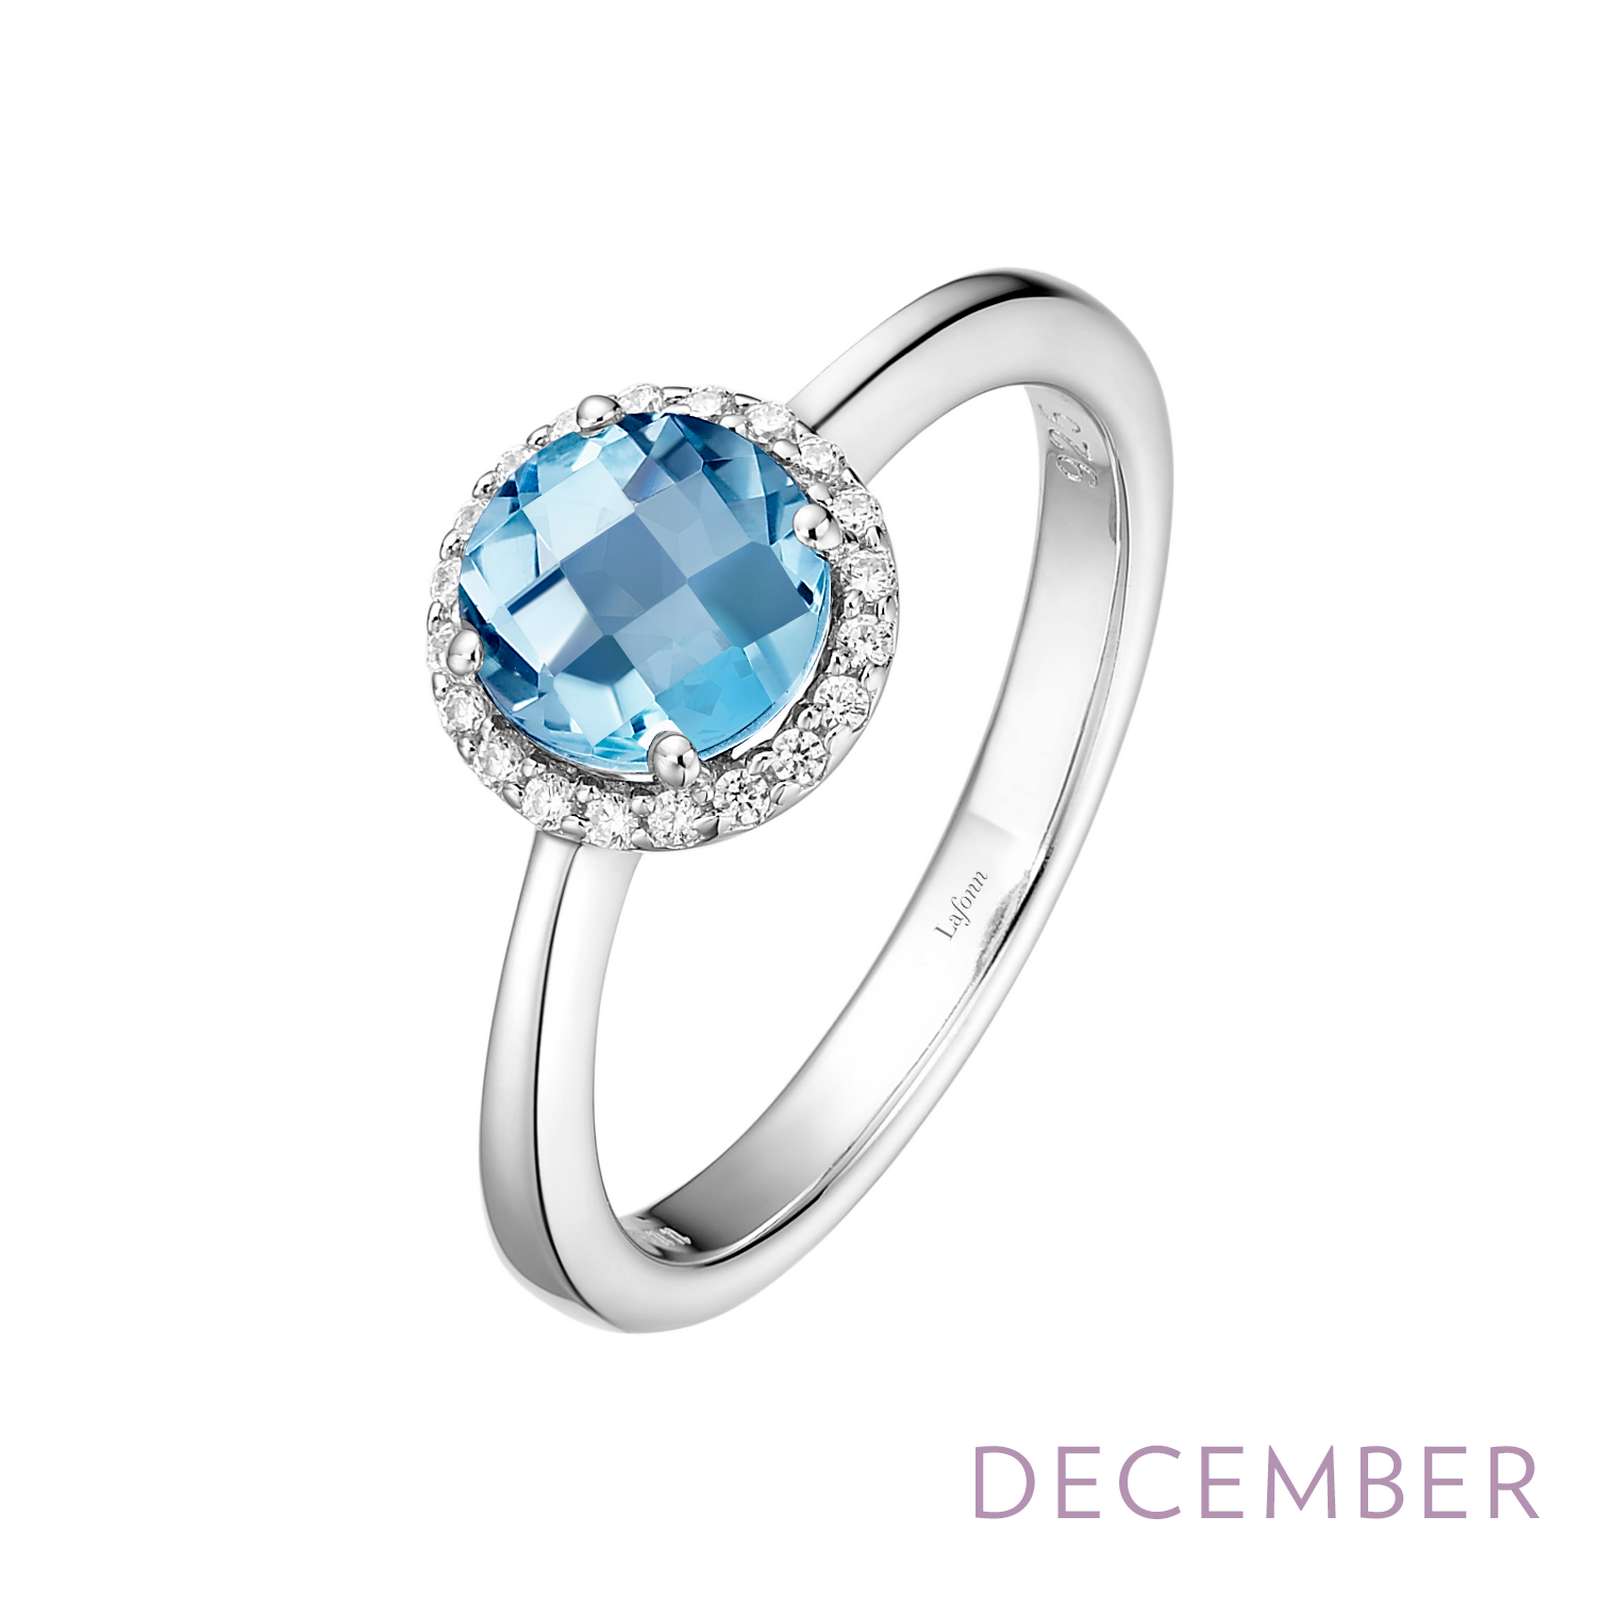 December Birthstone Ring Griner Jewelry Co. Moultrie, GA